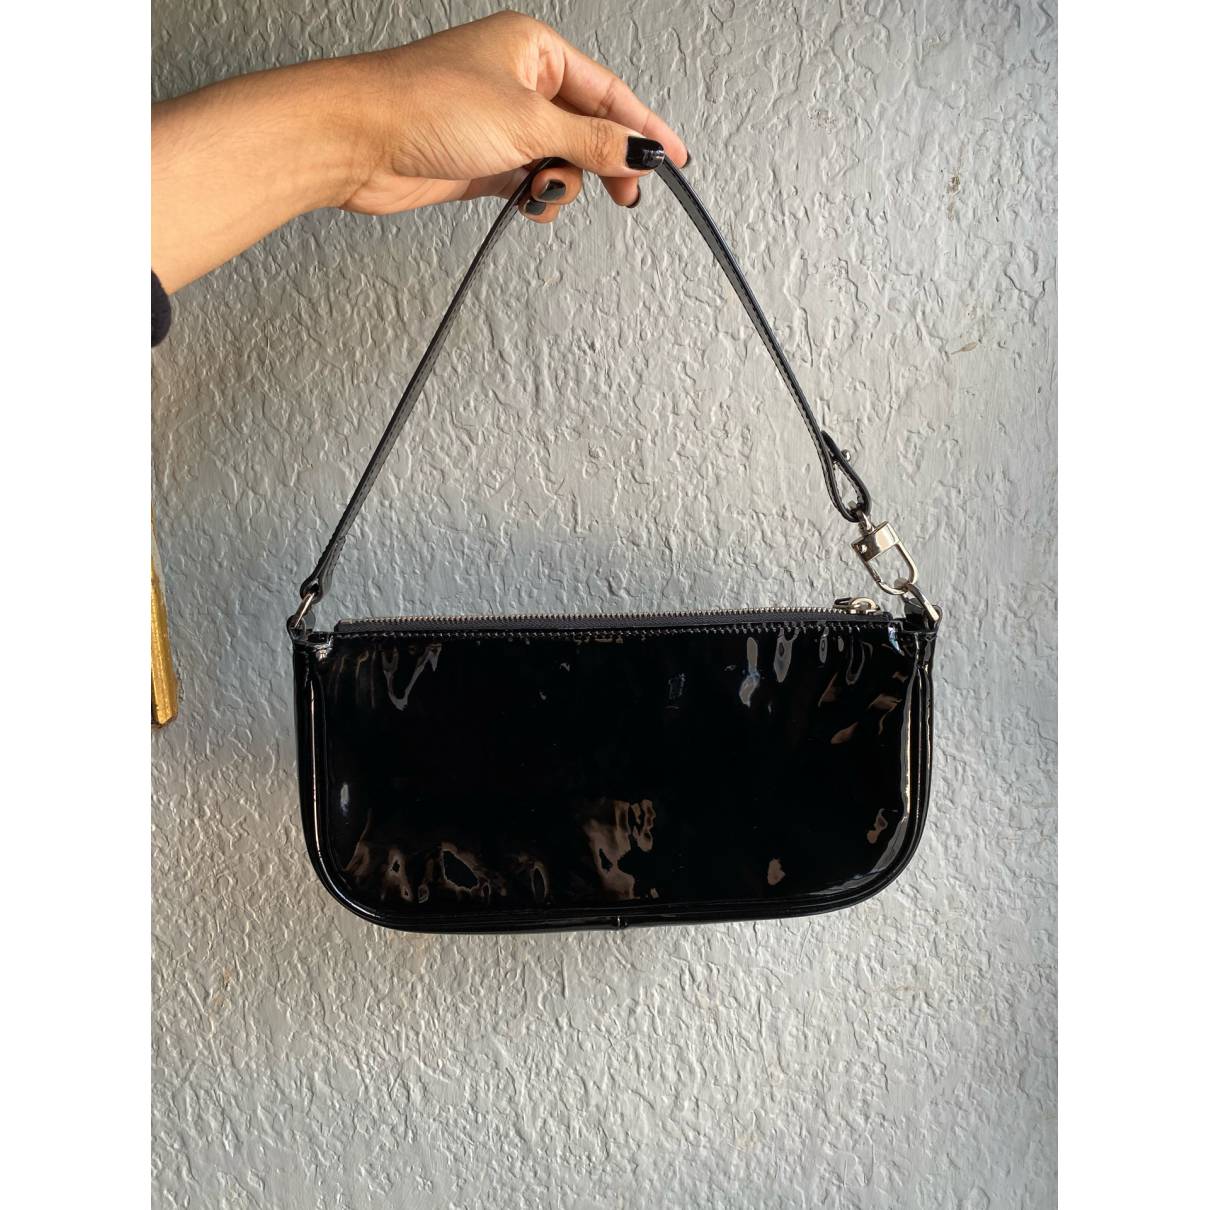 Rachel patent leather handbag By Far Black in Patent leather - 24800563